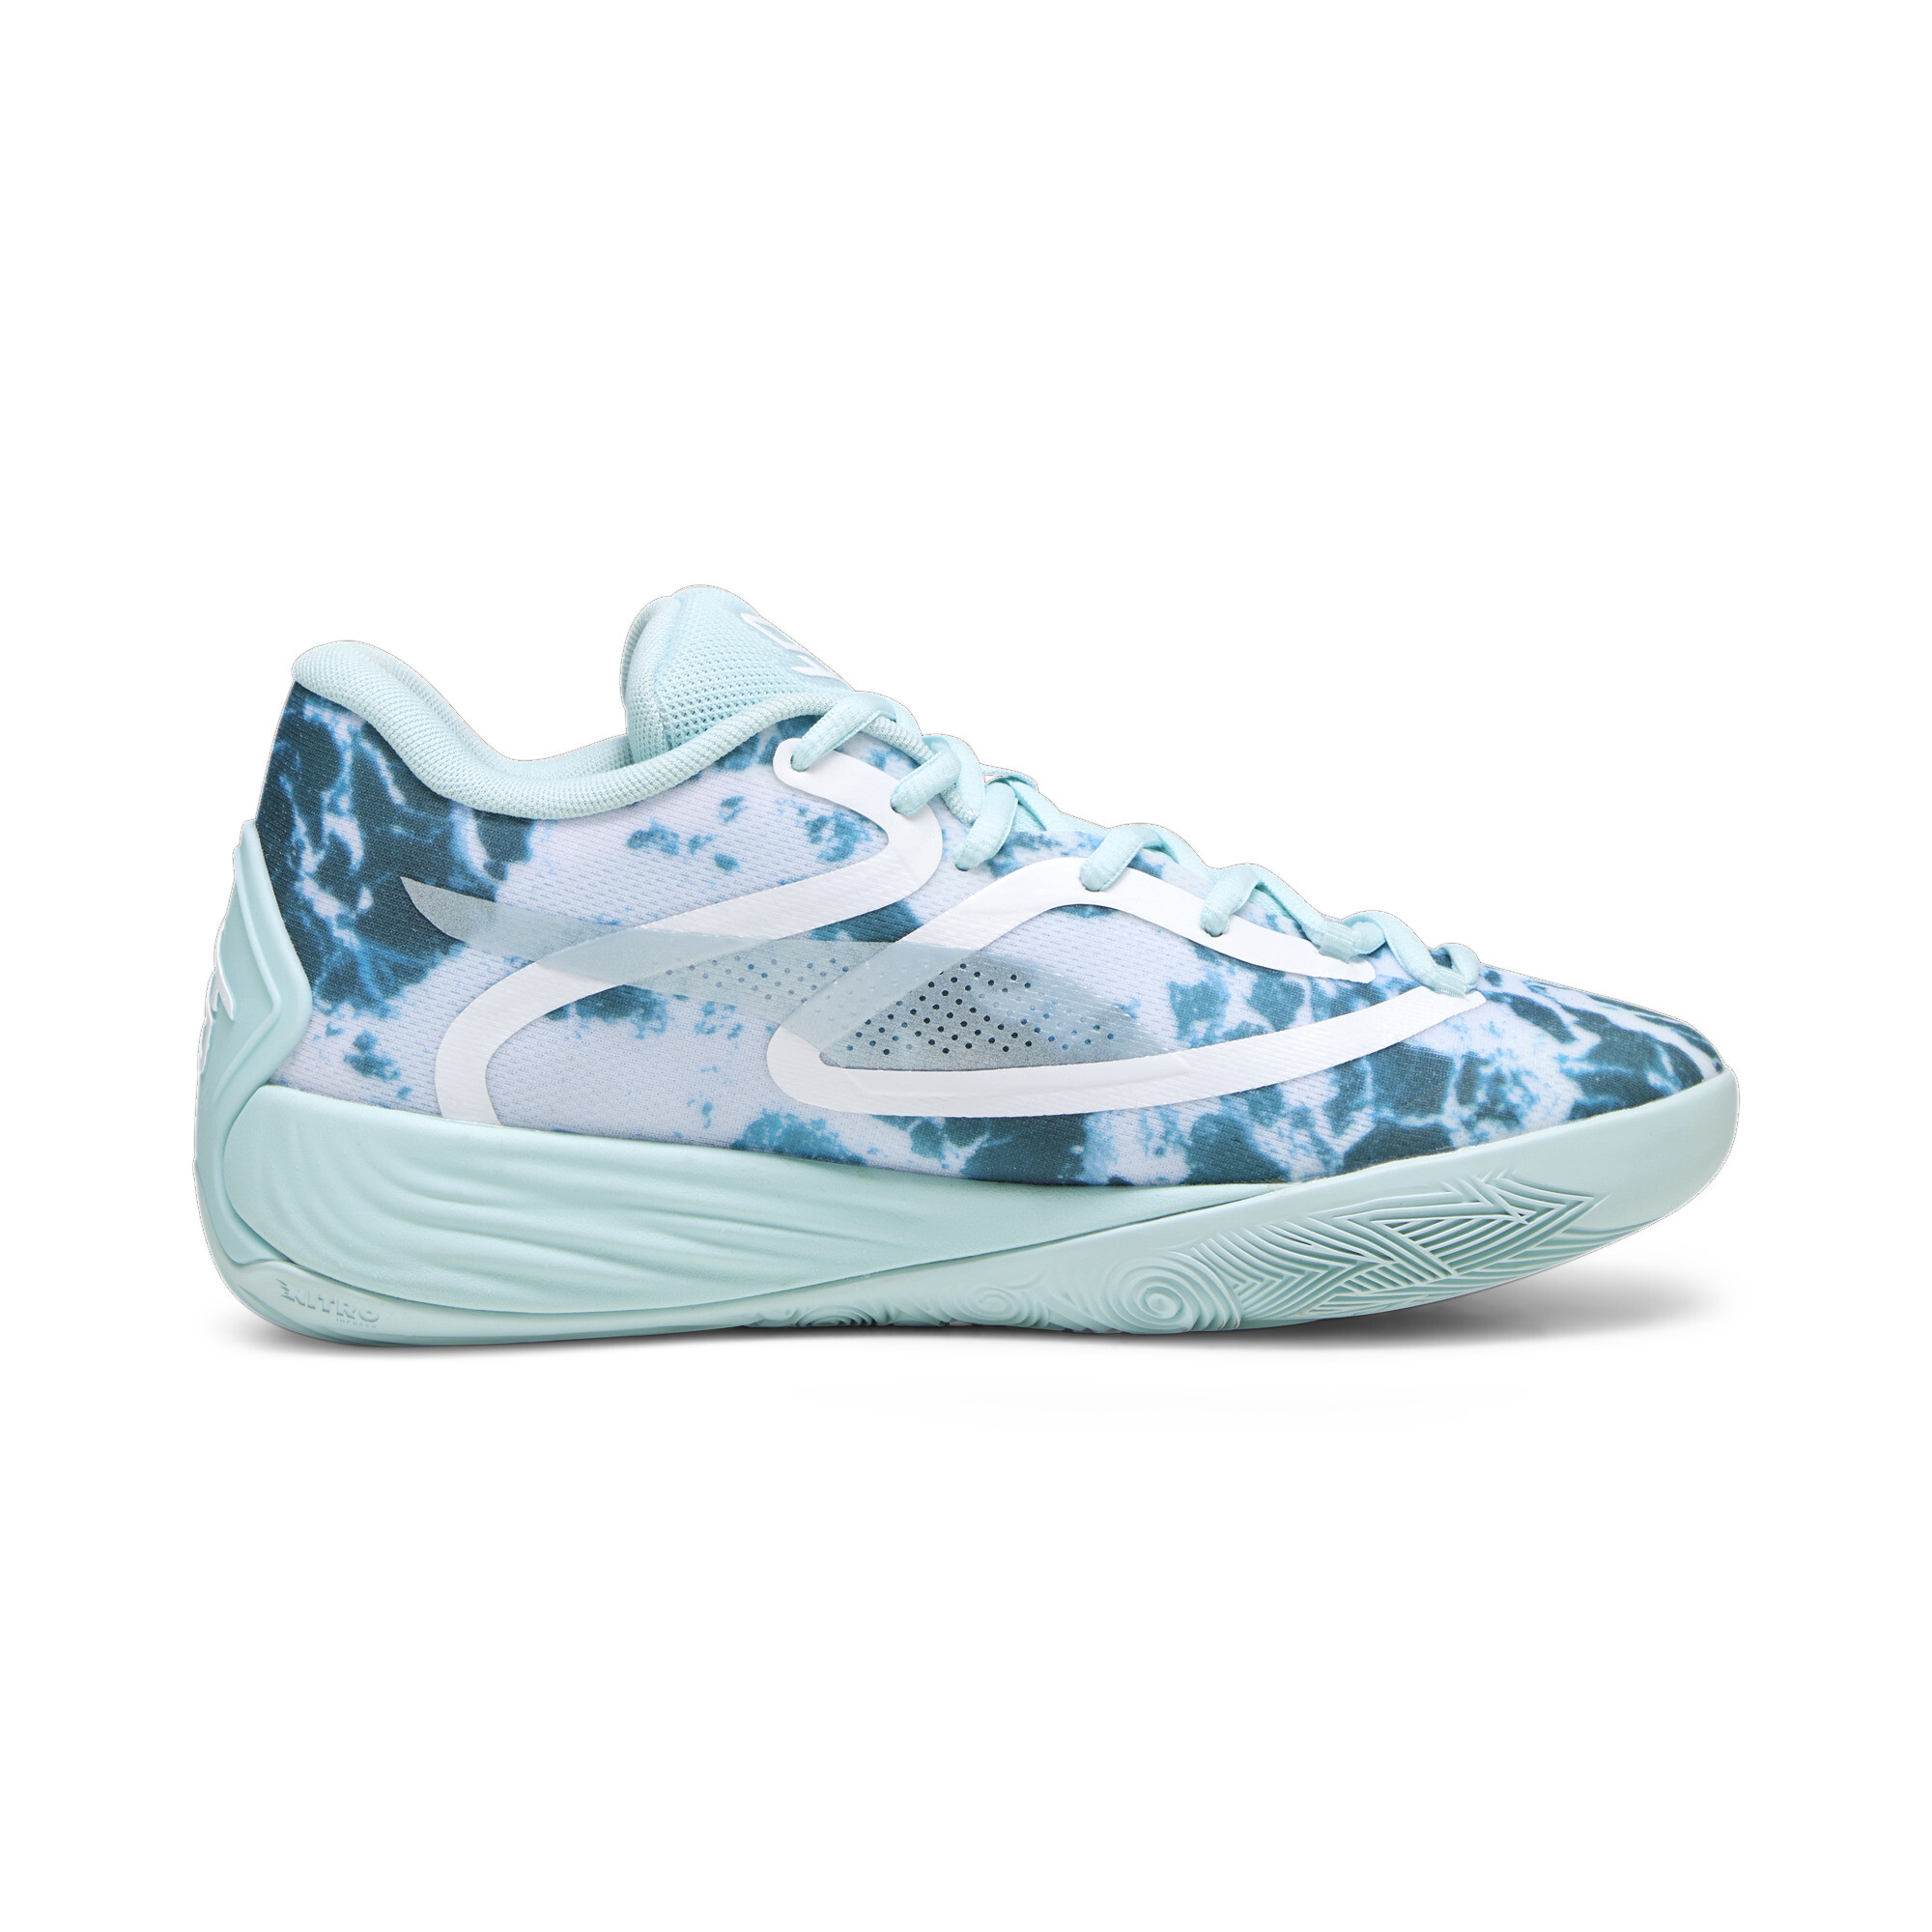 Women's Puma Stewie 2 Water's Basketball Shoes, Blue, Size 42, Shoes